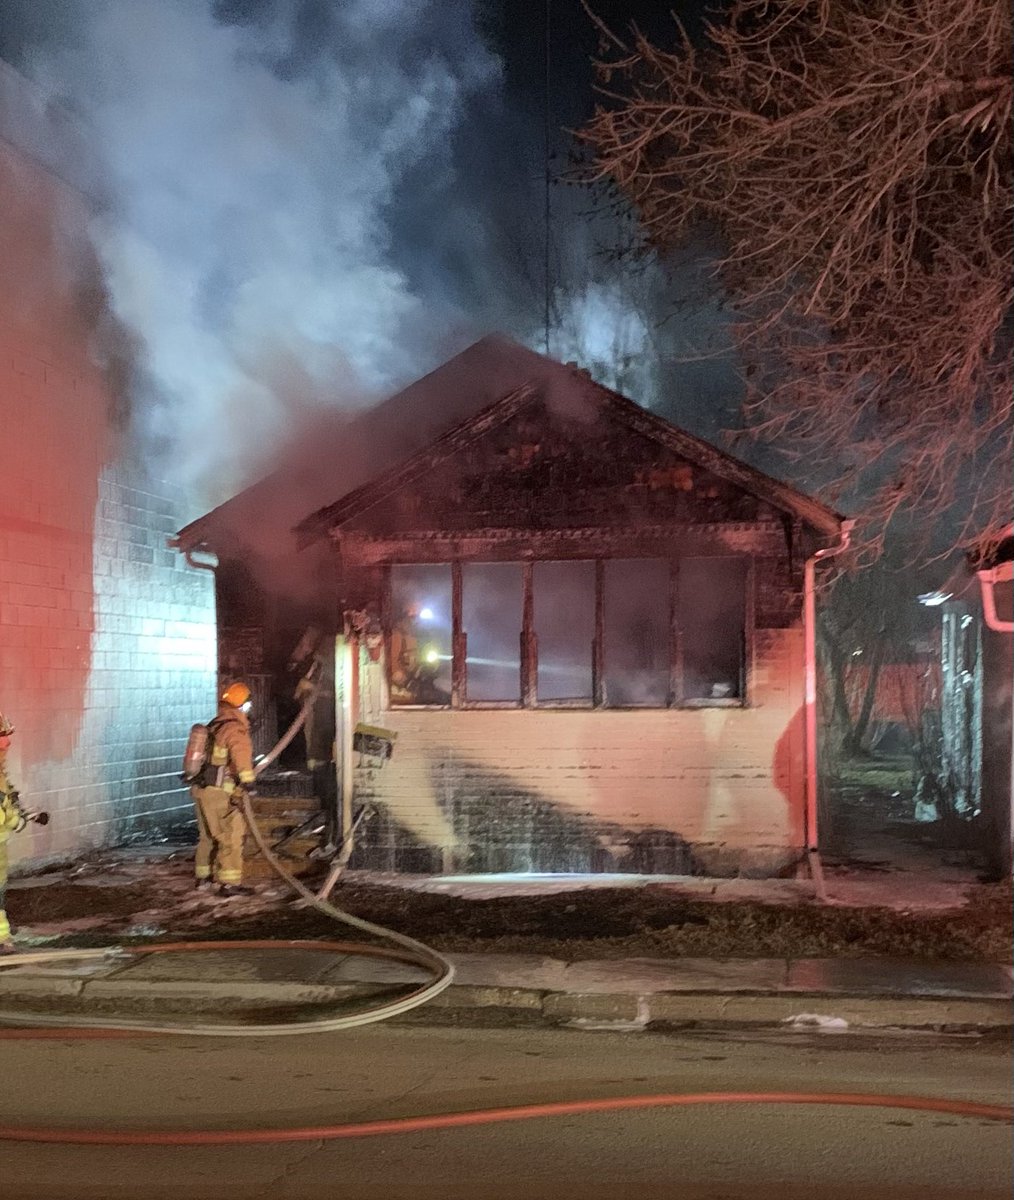 Crews are on scene of a house fire 500 Blk Victoria Ave. Fire and smoke from the home on arrival. Firefighters made entry and removed one occupant who has been transported to hospital by EMS. Fire under control. No further injuries noted. Fire will be under investigation. #YQR